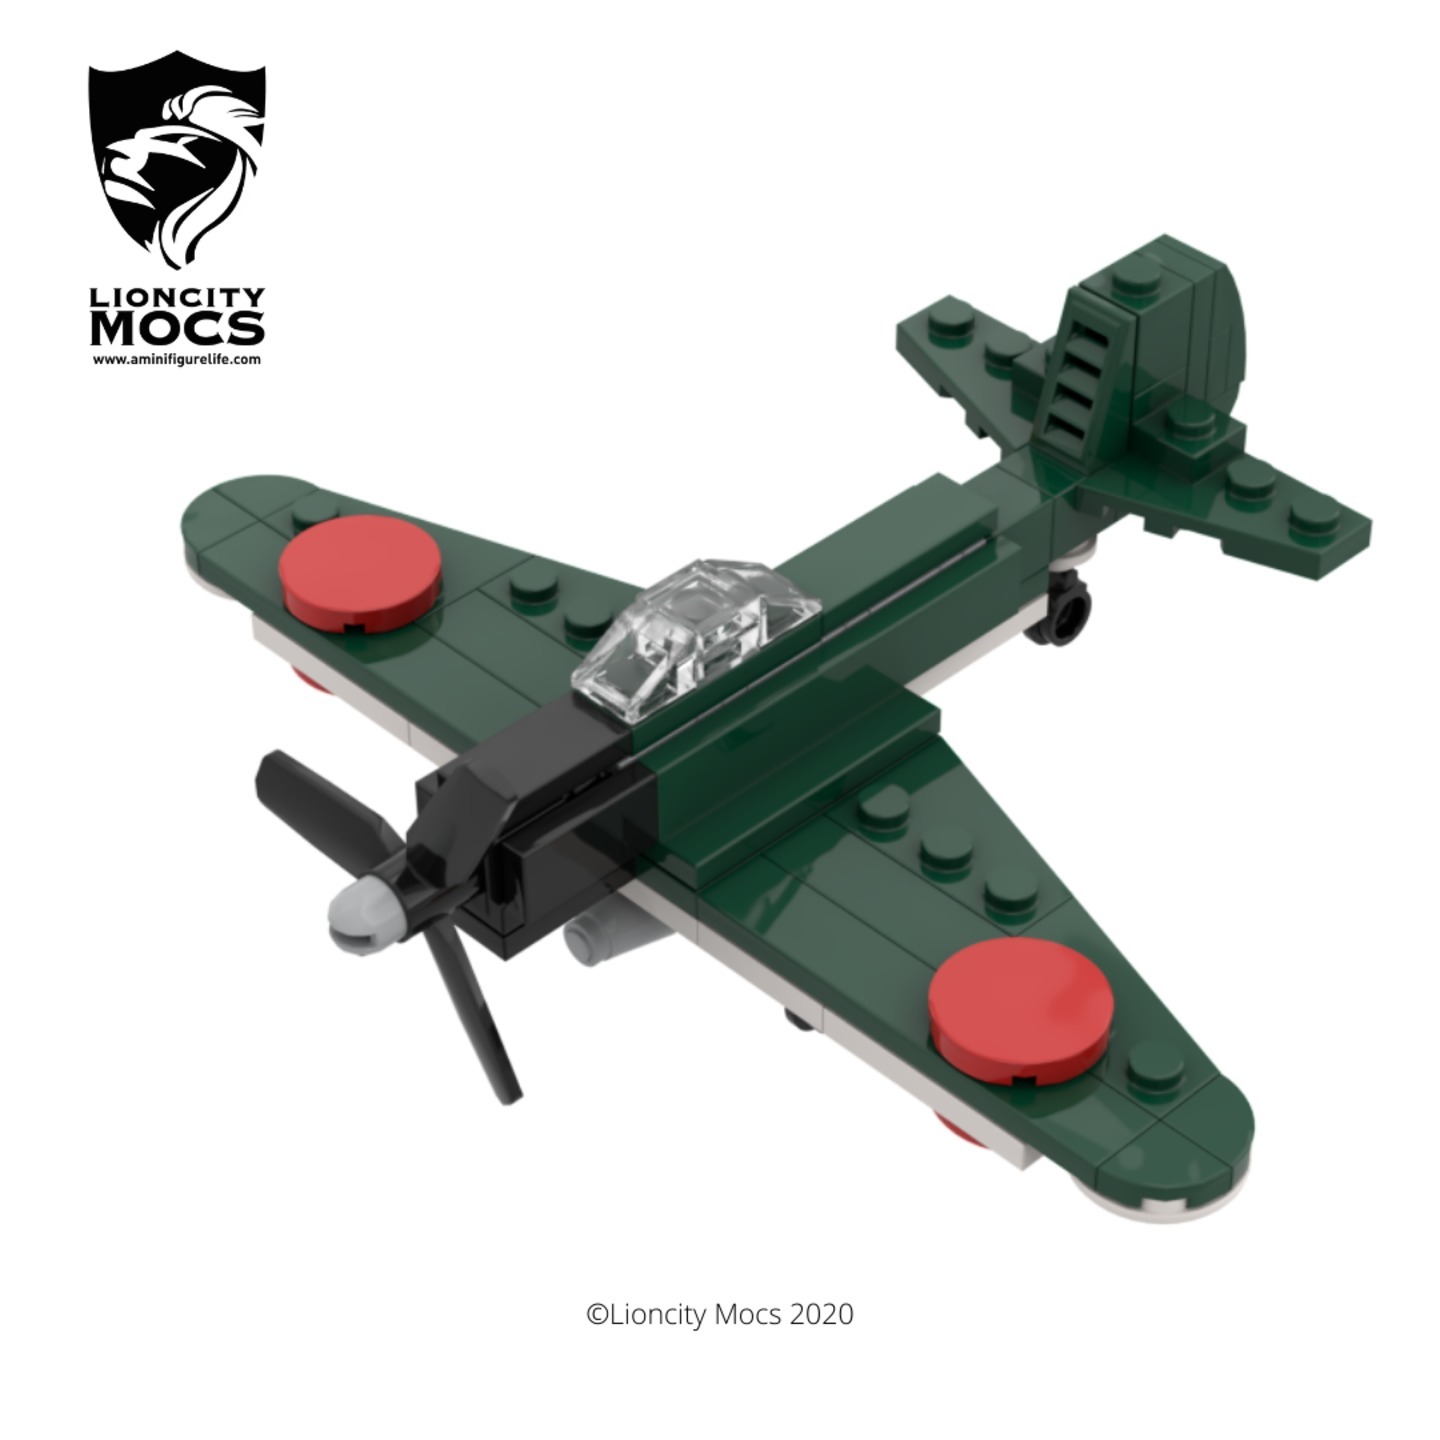 [PDF Instructions Only] A6M Zero Fighter WWII Mini Aircraft